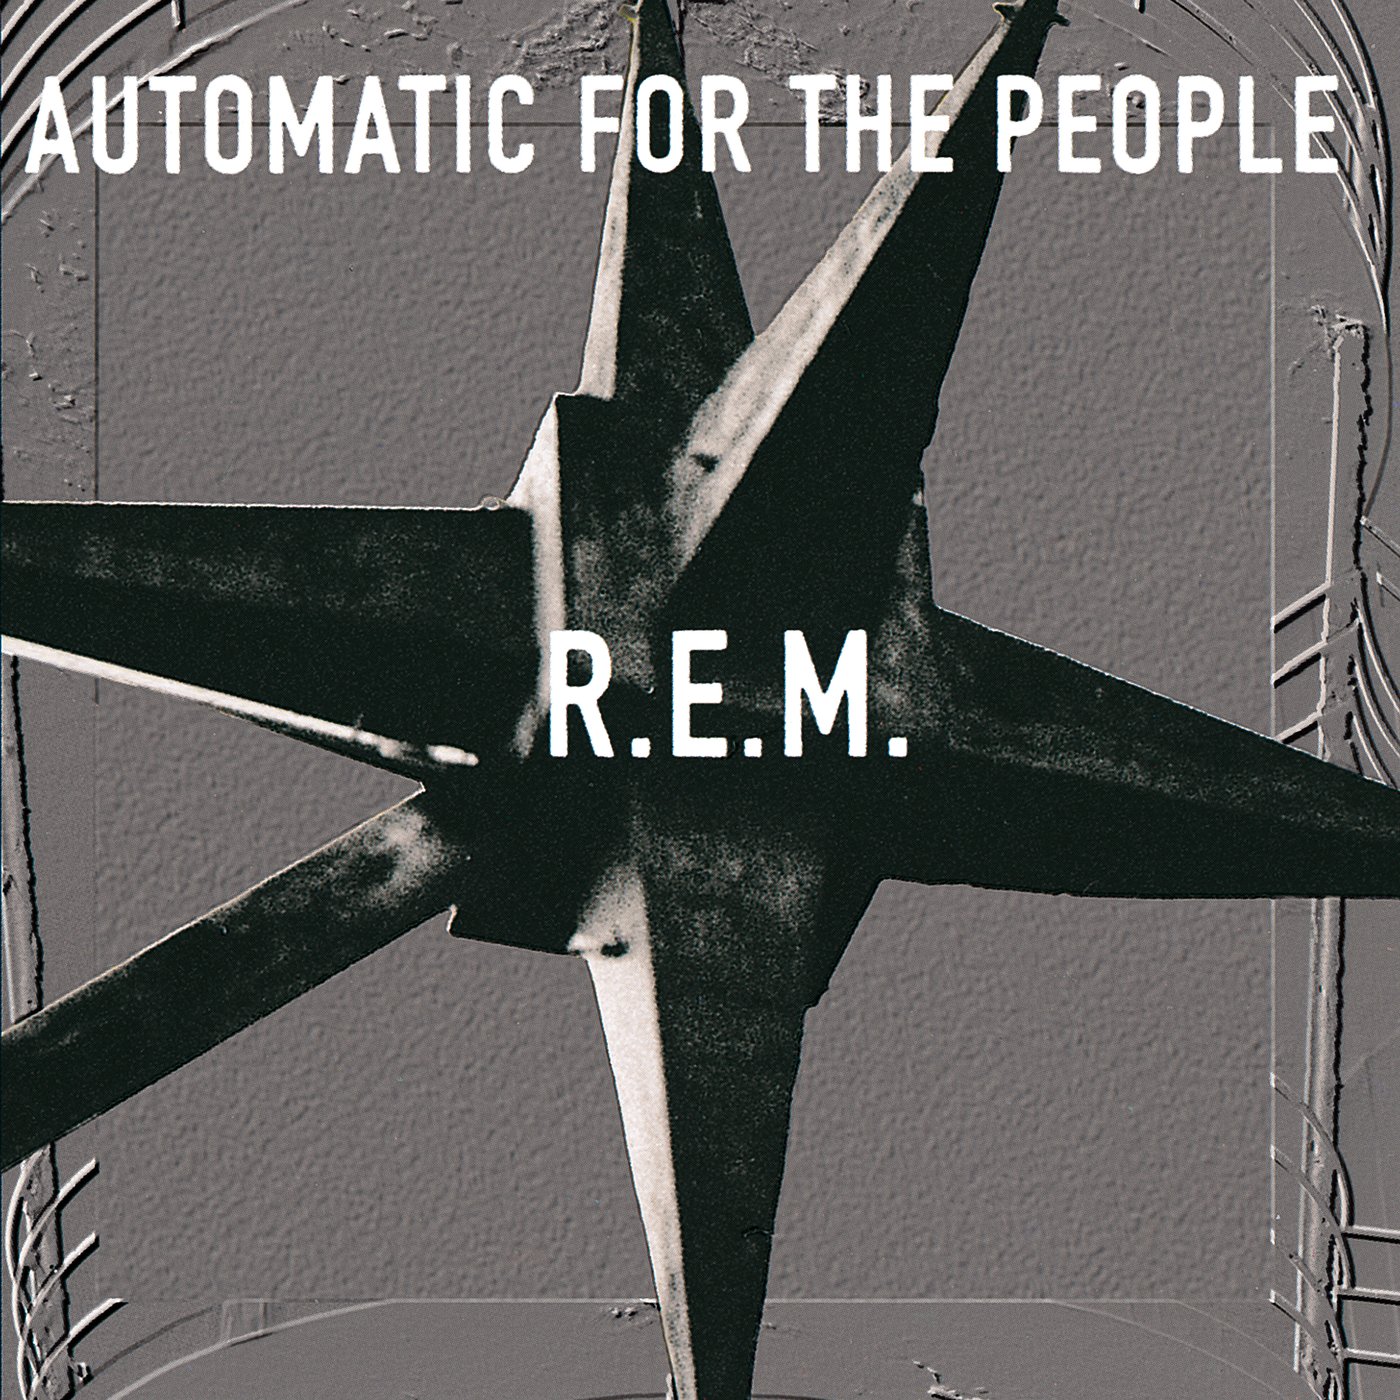 Automatic for the People, R.E.M.